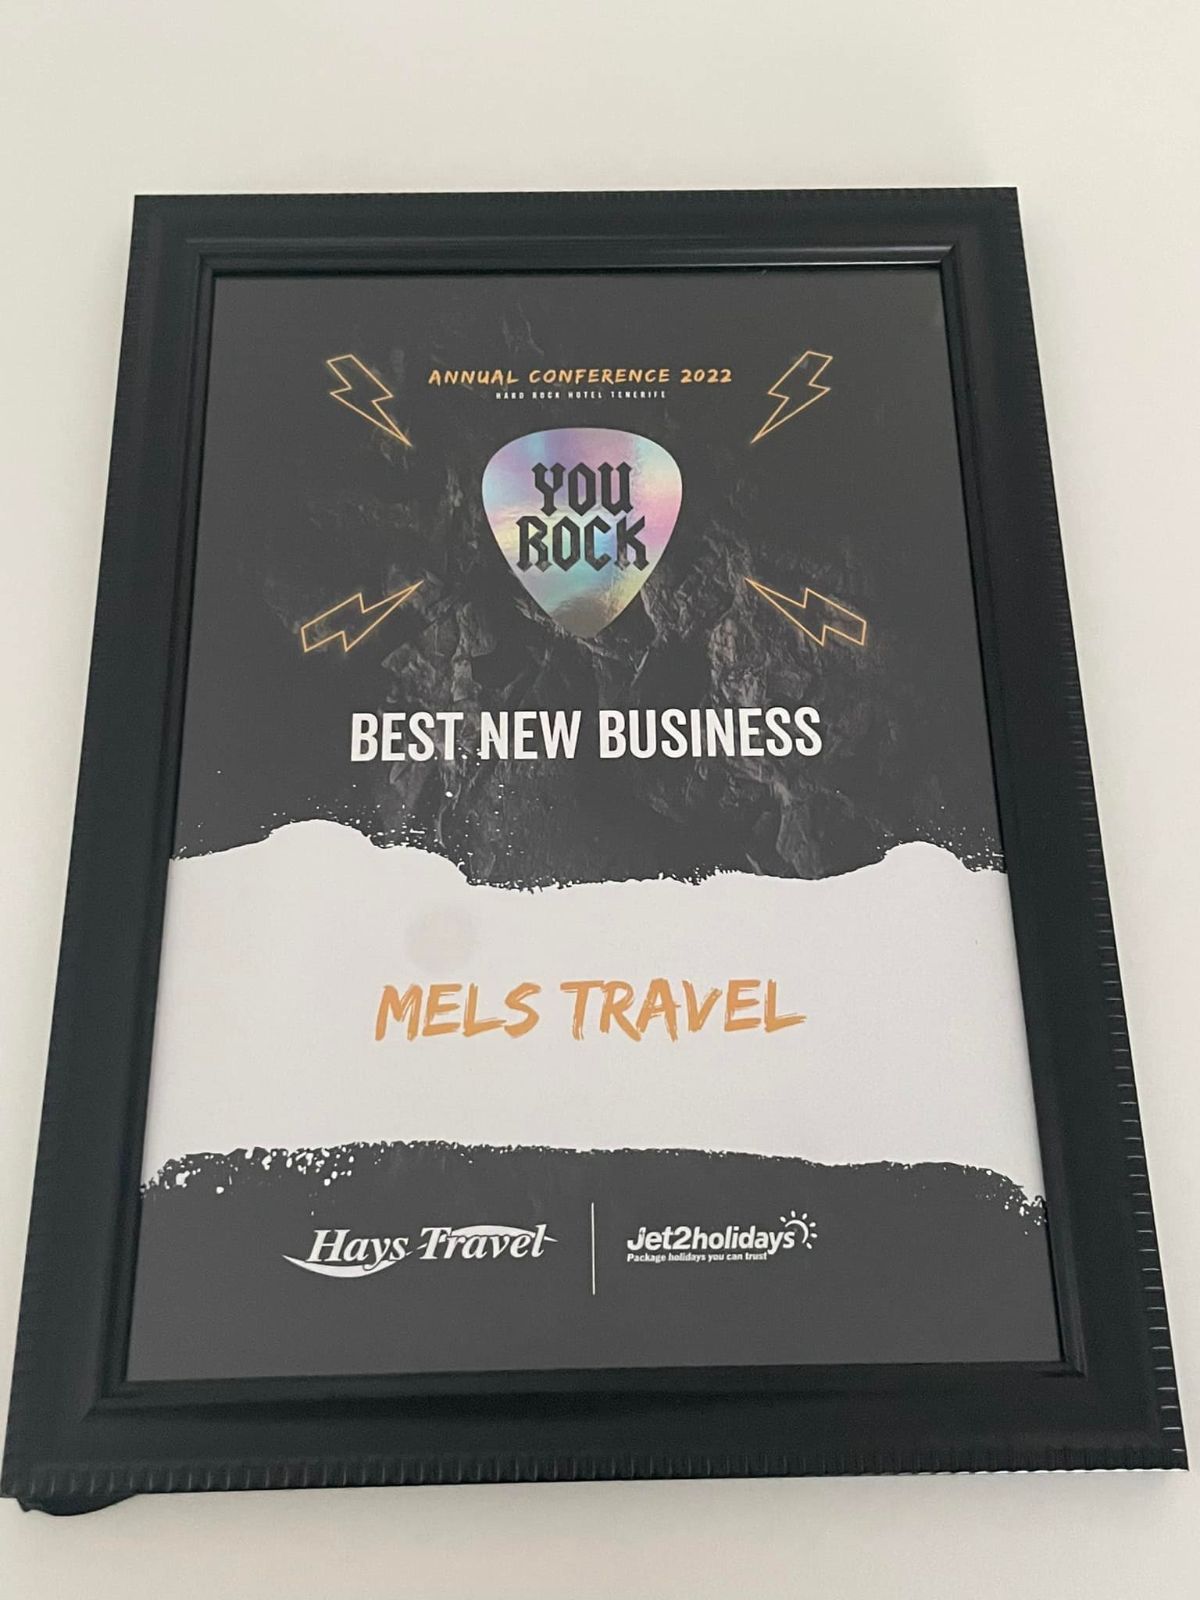 Hays Travel Independence Group - Best New Business Award 2022